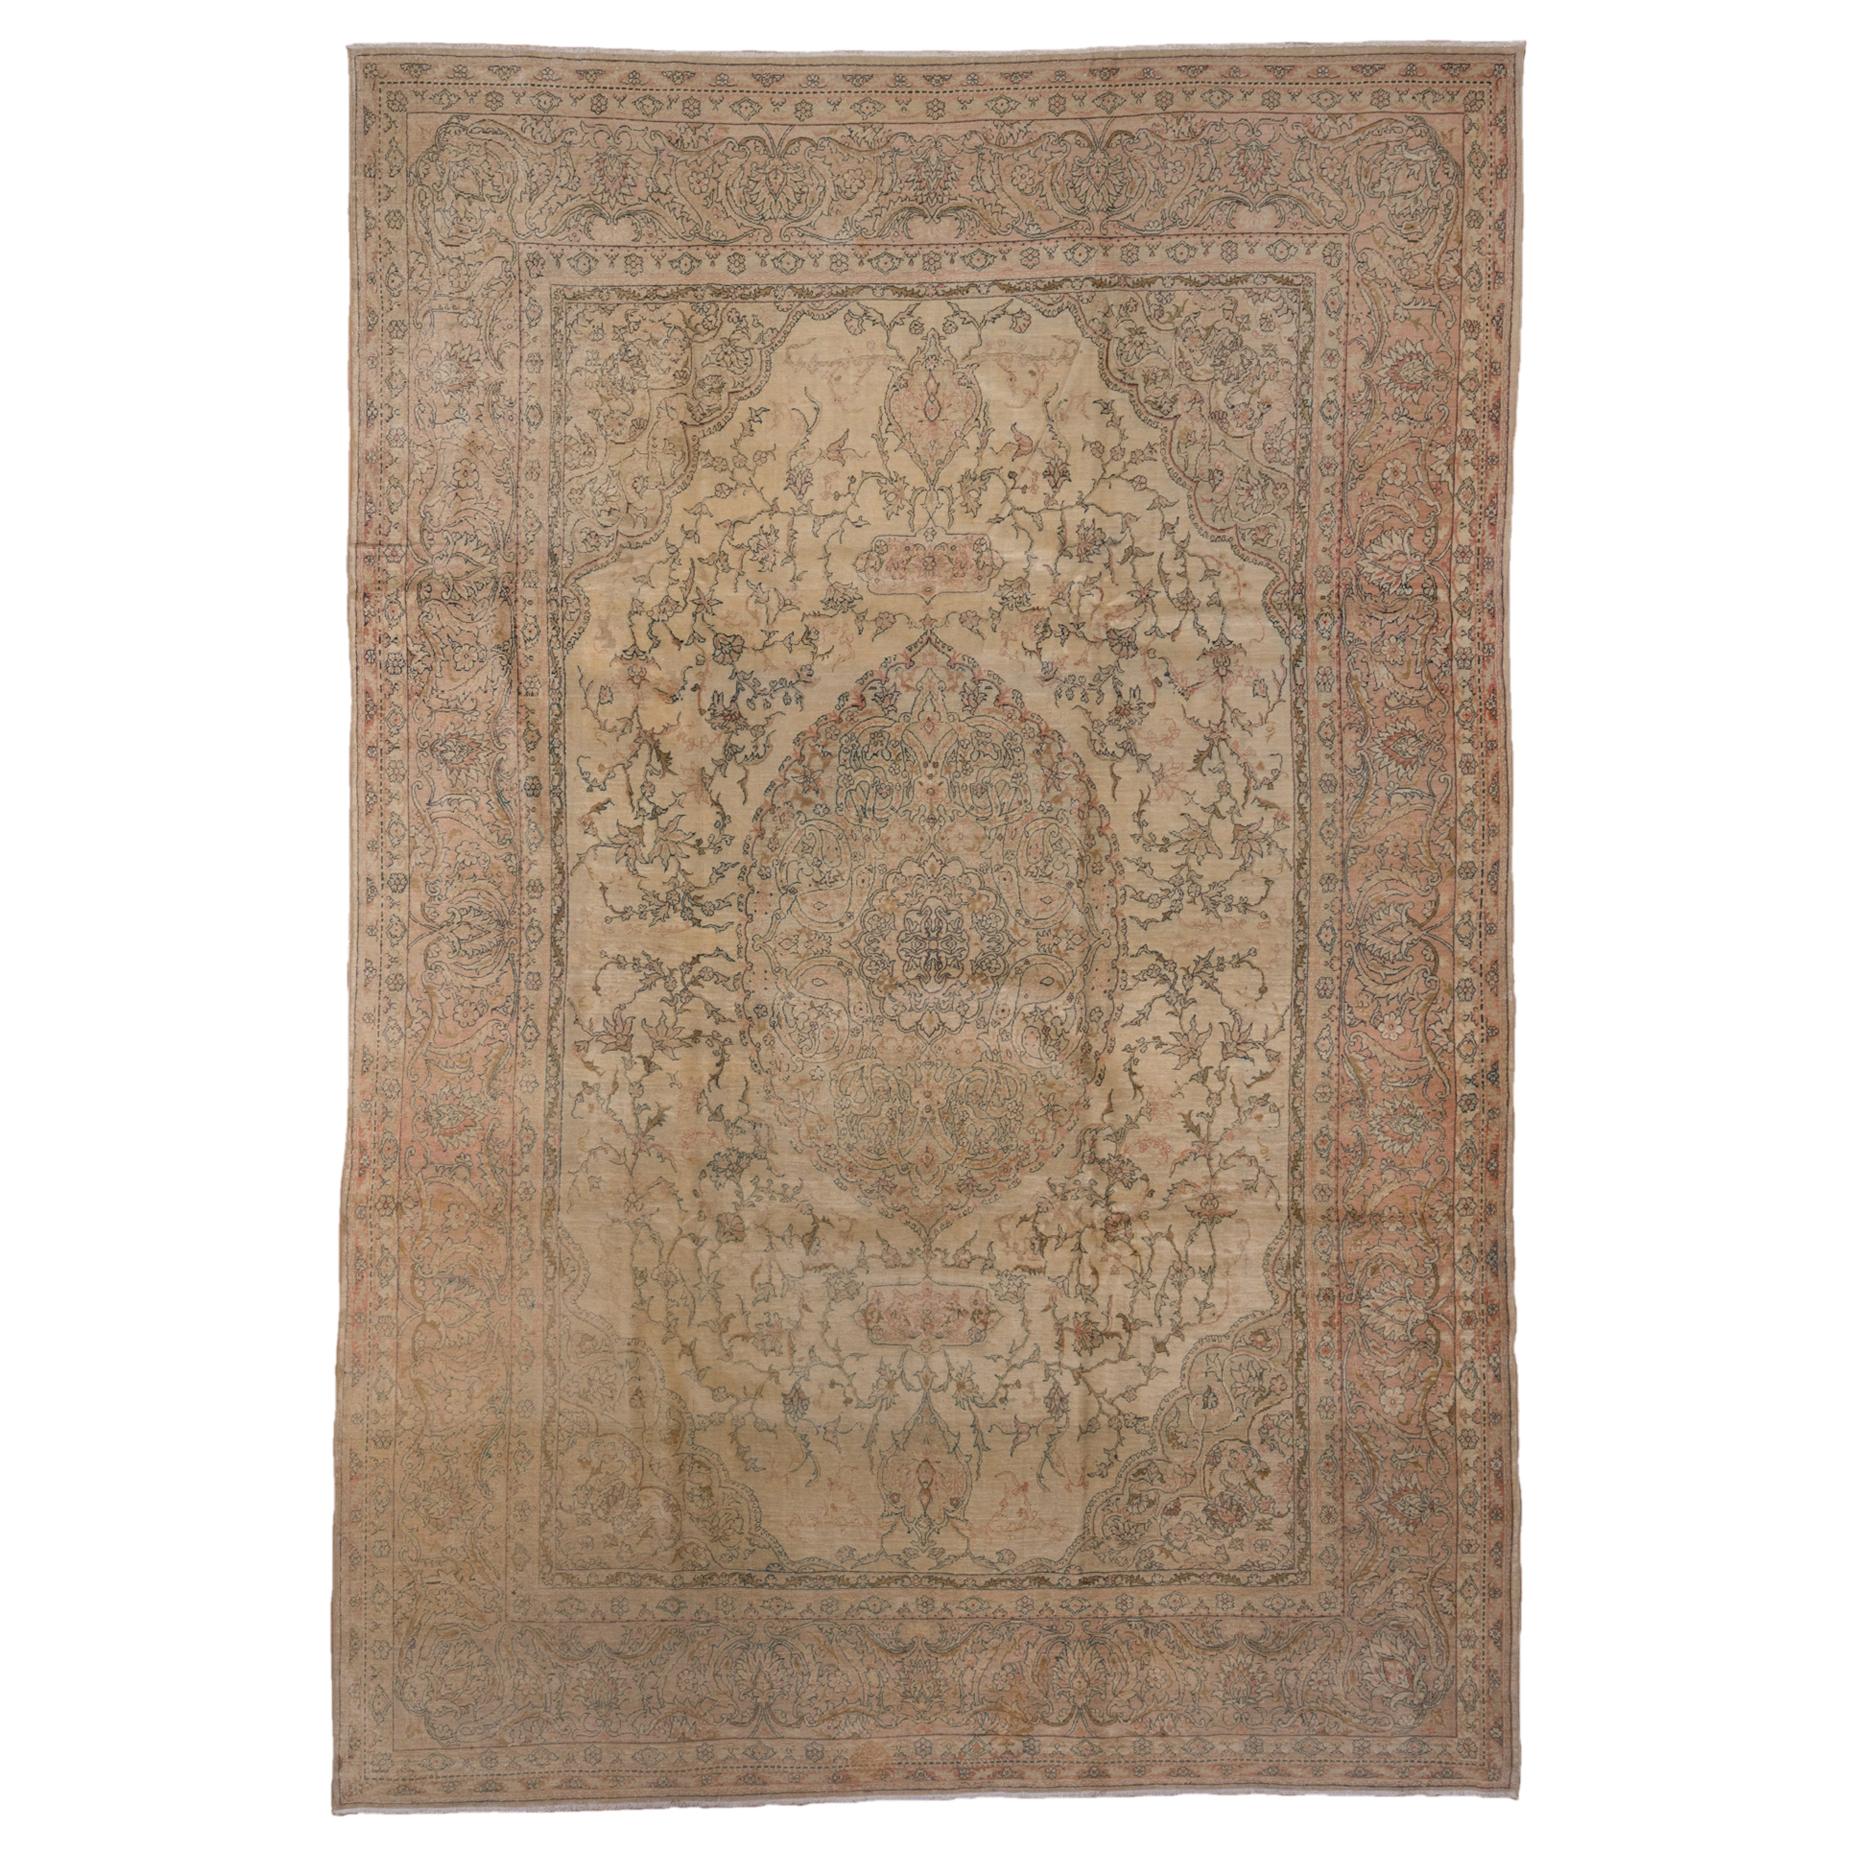 Fine Antique Turkish Sivas Rug with Green Accents, Circa 1920s For Sale